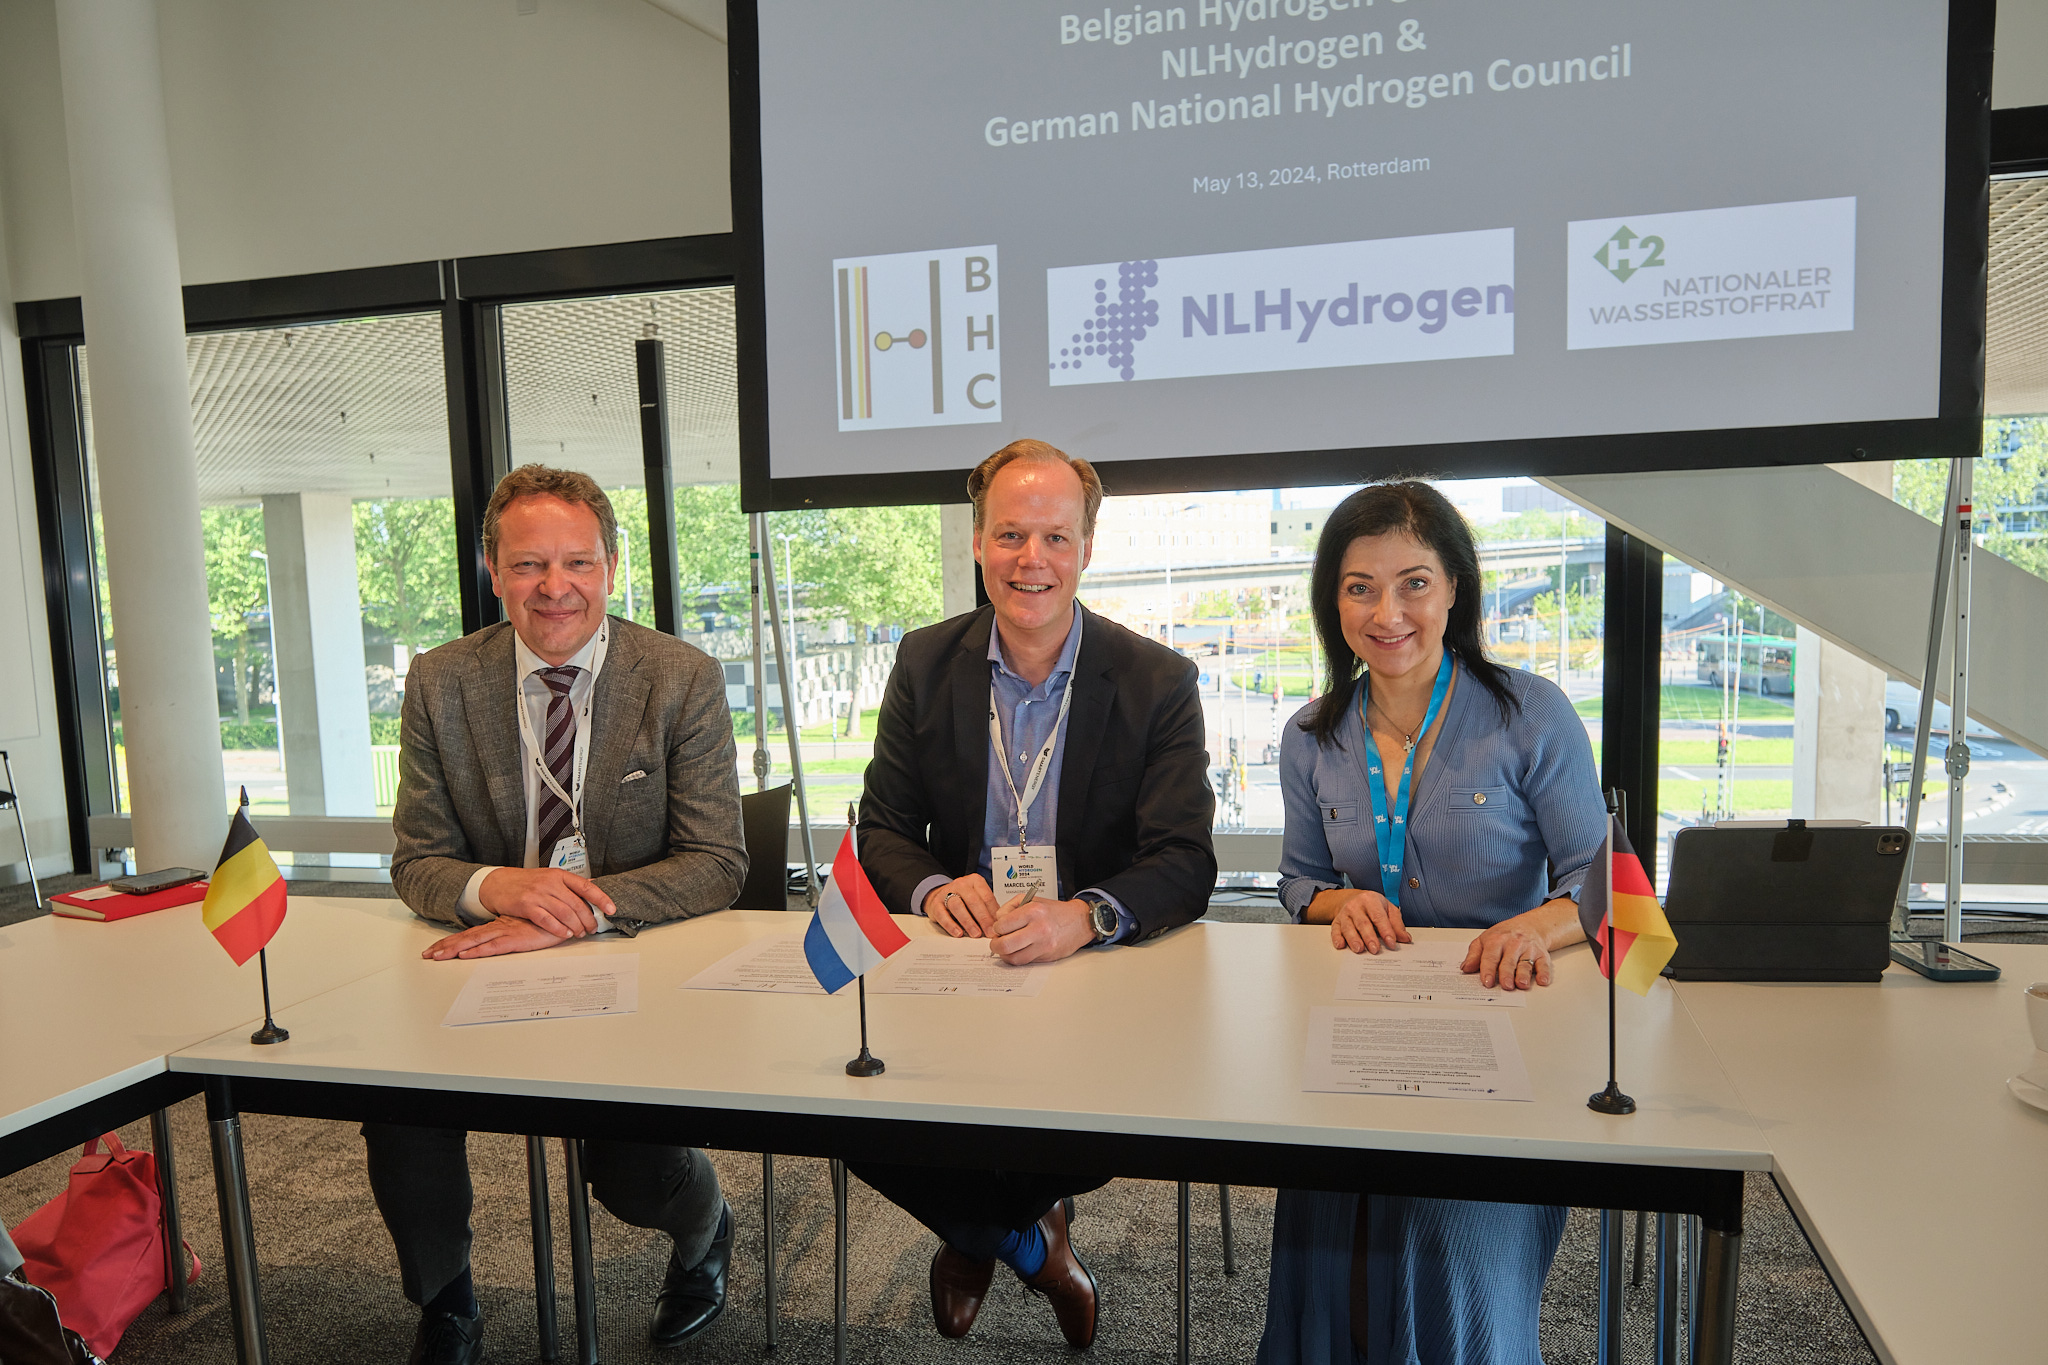 Belgian Hydrogen Council, NLHydrogen, and the German National Hydrogen Council sign tripartite Memorandum of Understanding to advance the hydrogen economy in Europe 